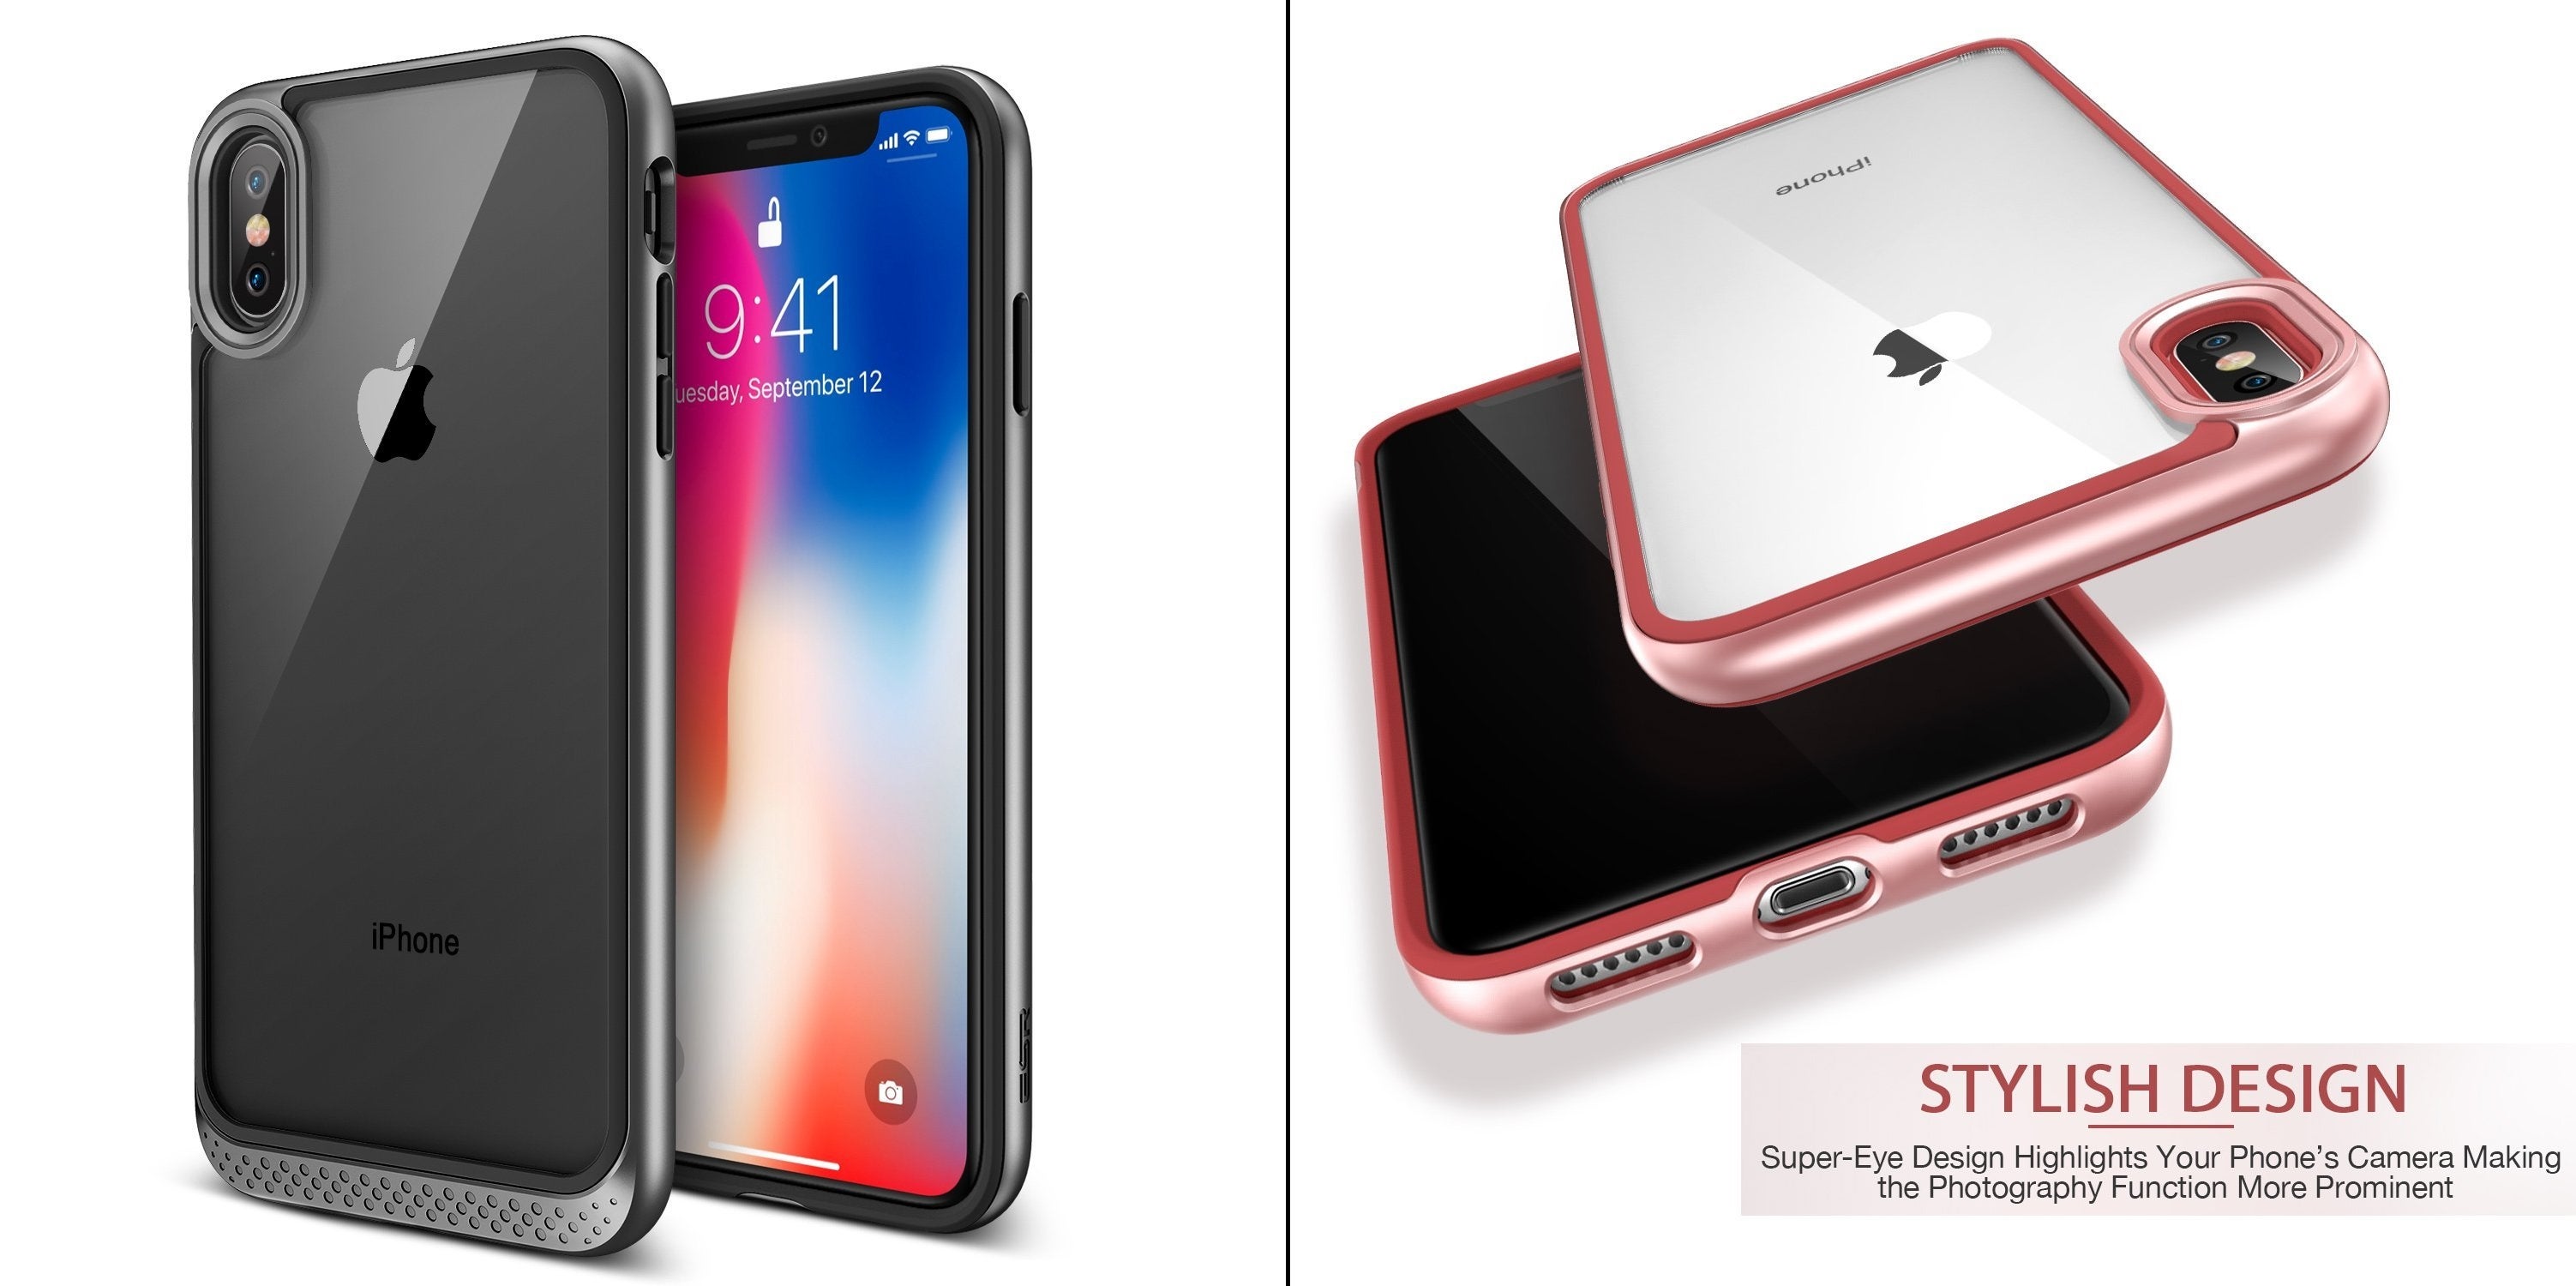 Dress it in style: here are 14 elegant and stylish cases for the iPhone X